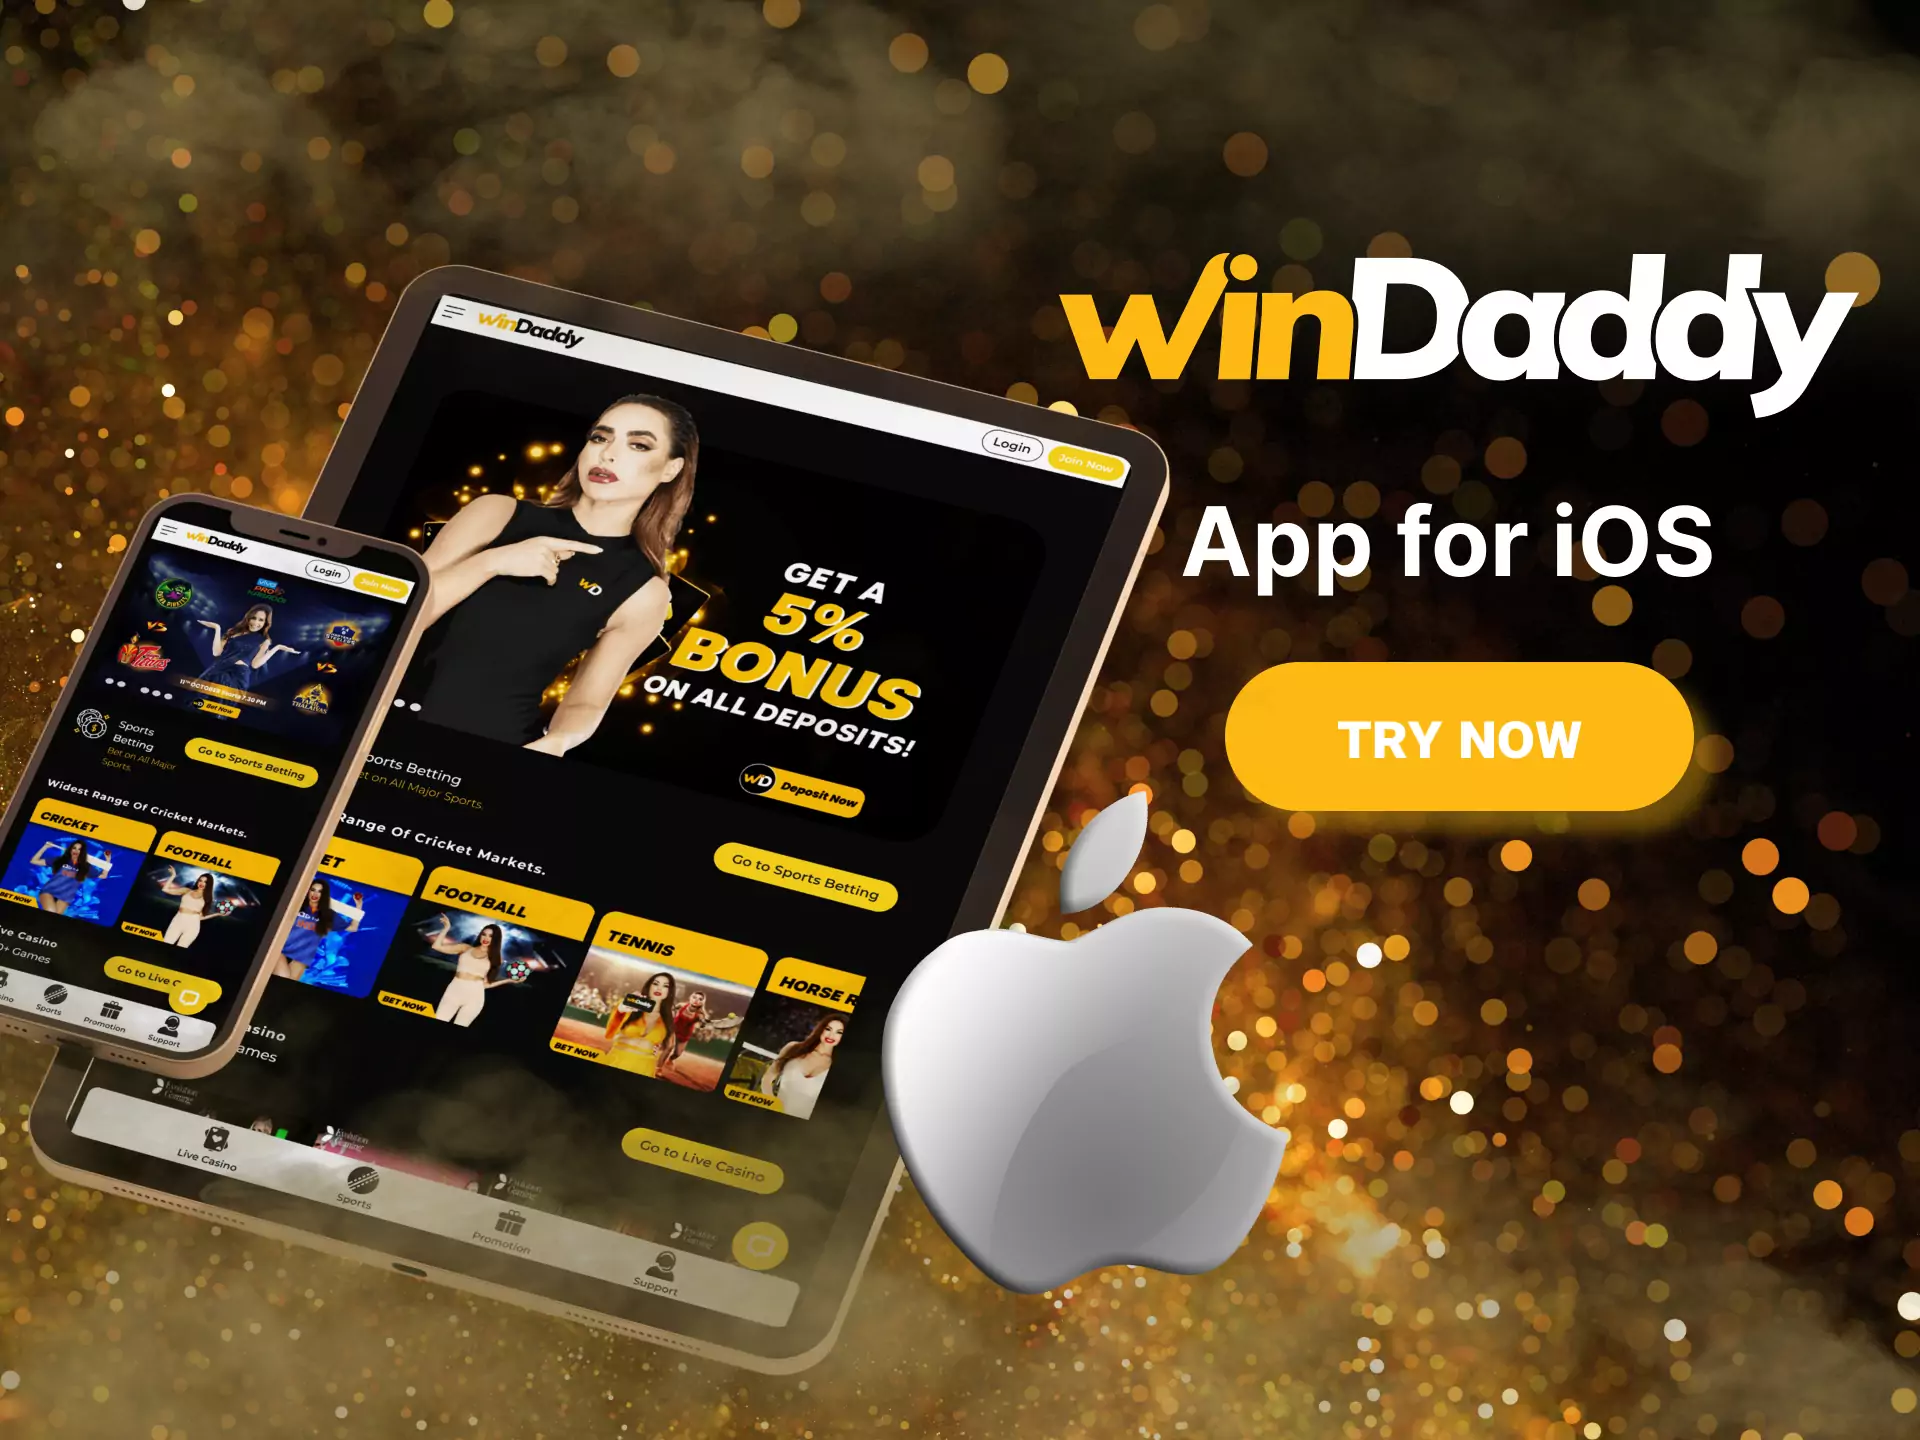 Enjoy a convenient mobile version of Windaddy on iOS devices.